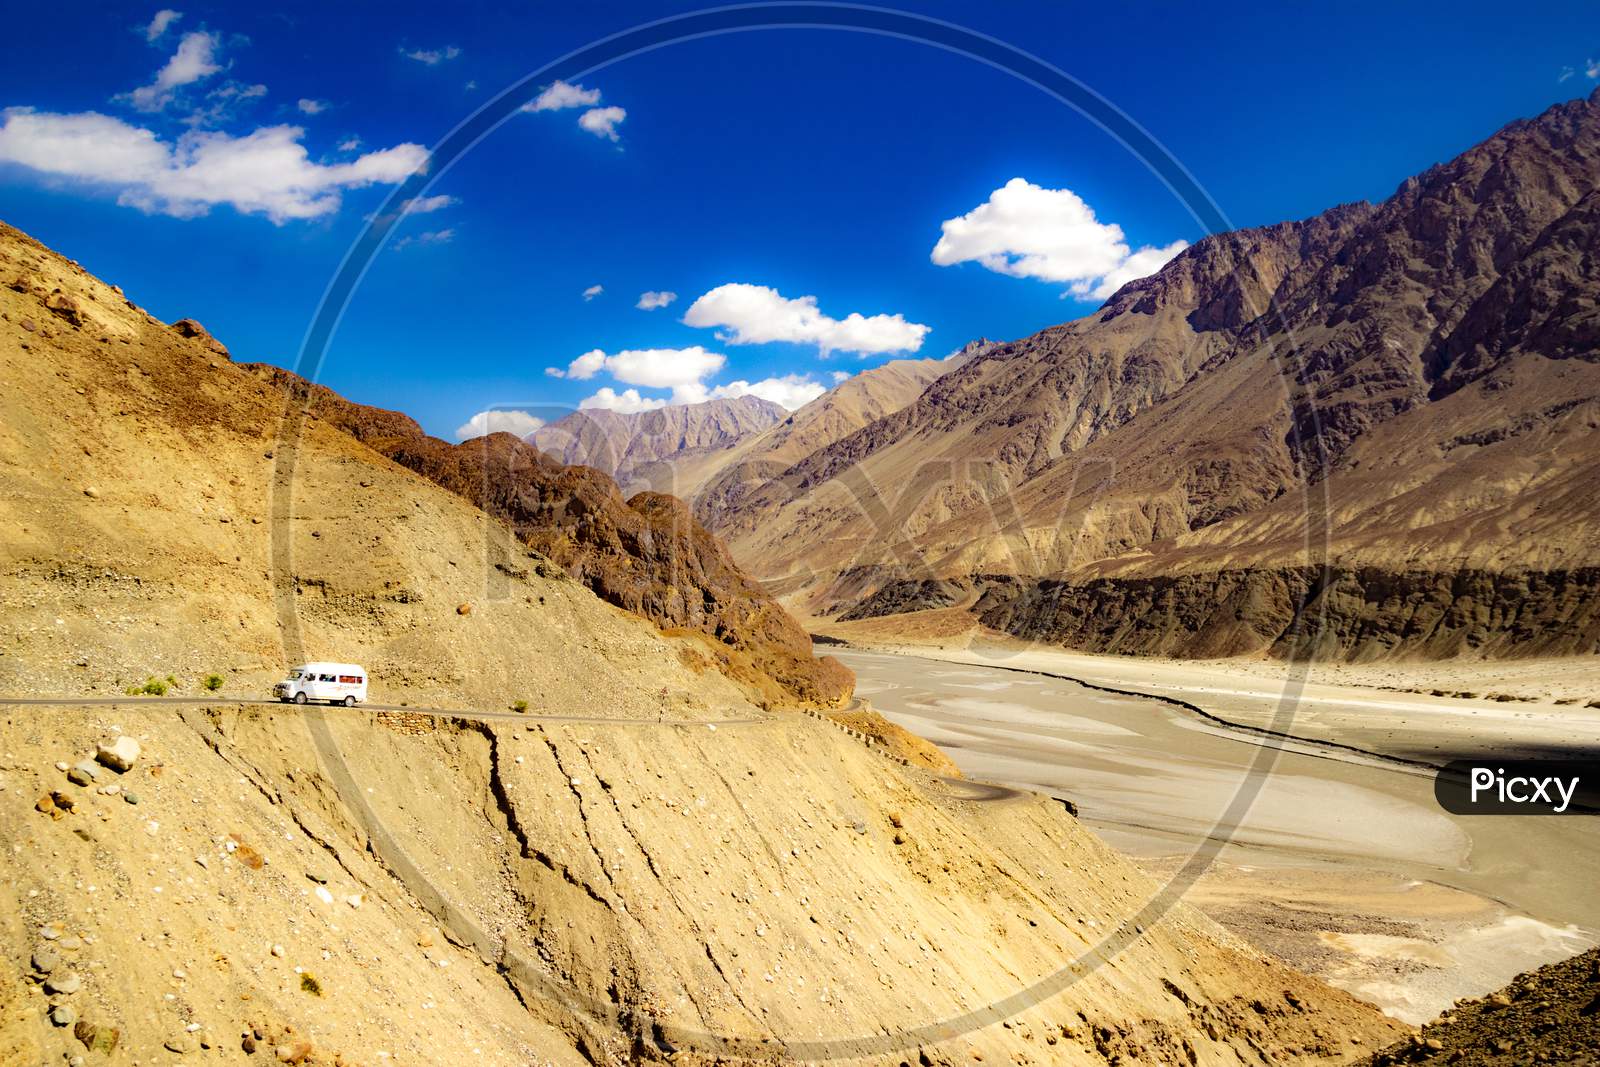 High Dynamic Range Image Of Barren Mountain In A Desert With River And Deep Blue Sky And White Patchy Clouds In Ladakh, Jammu And Kashmir, India